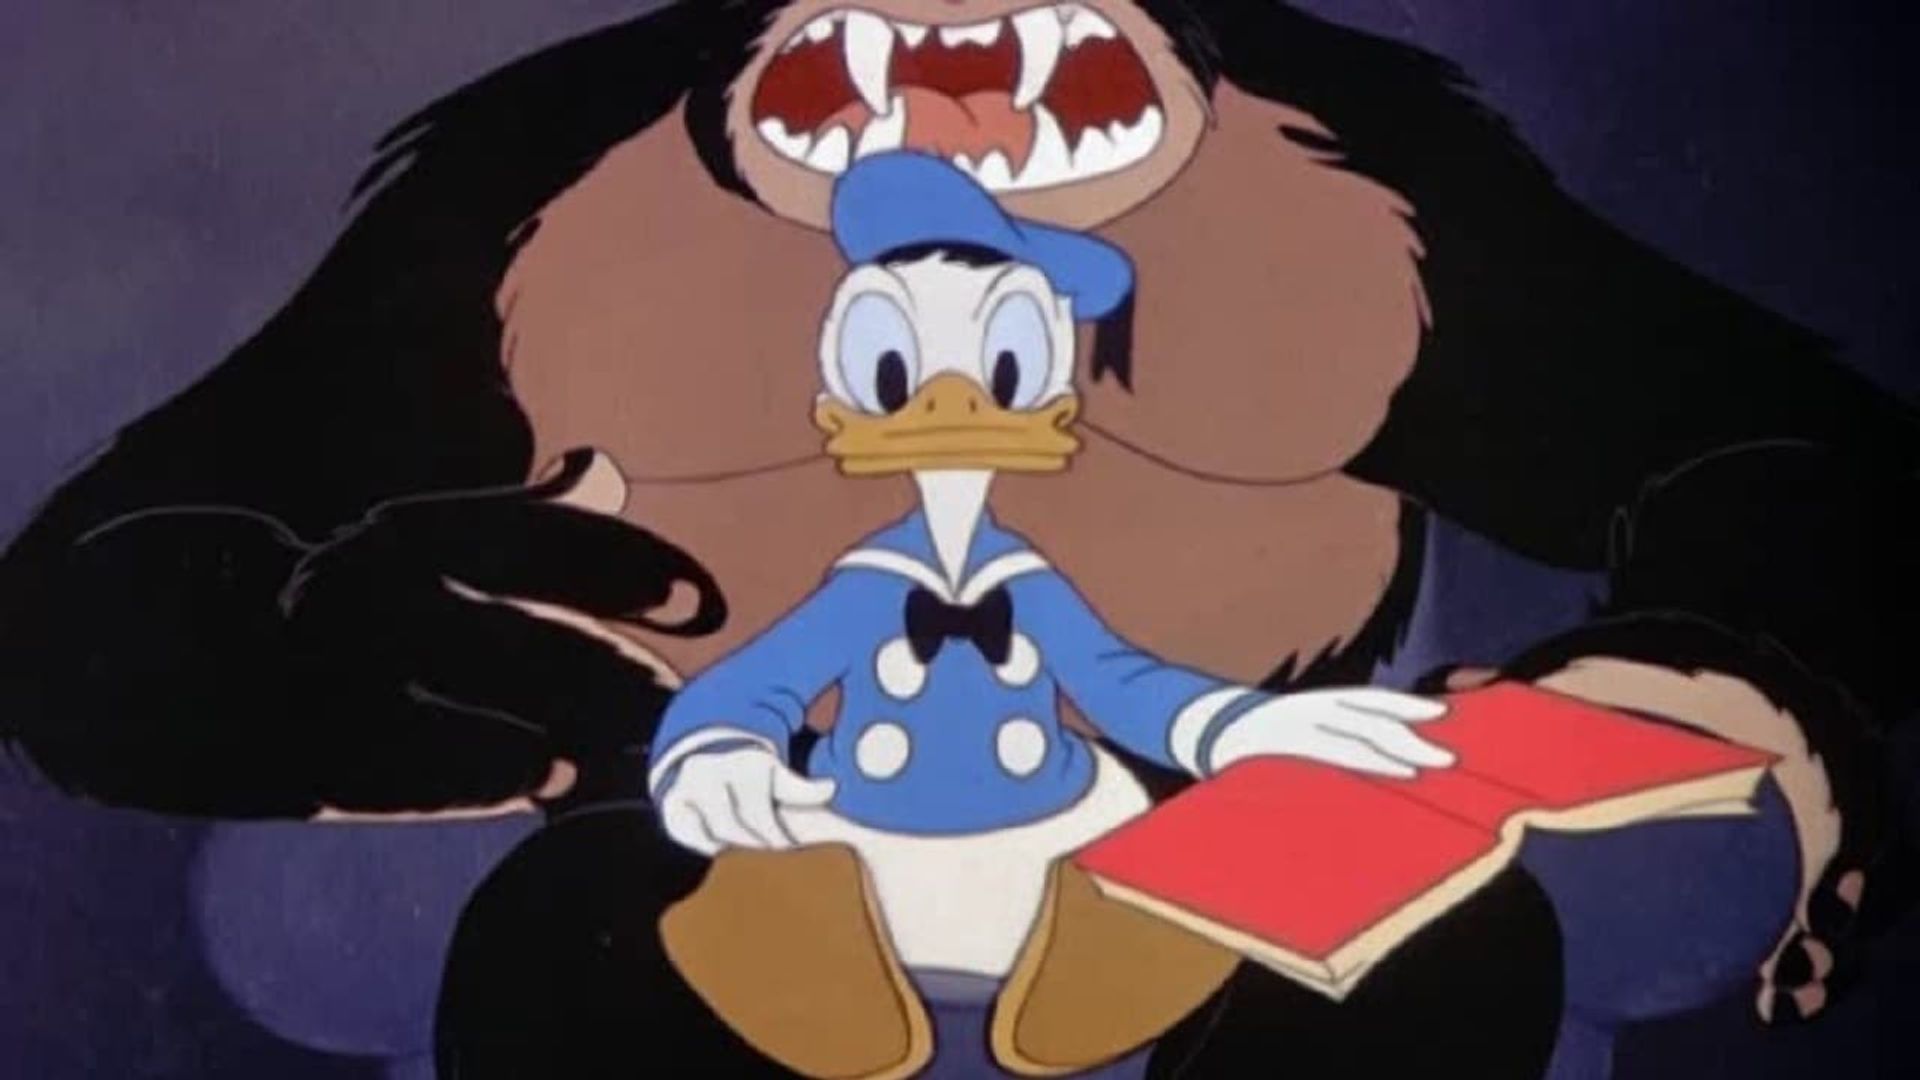 Donald Duck and the Gorilla background